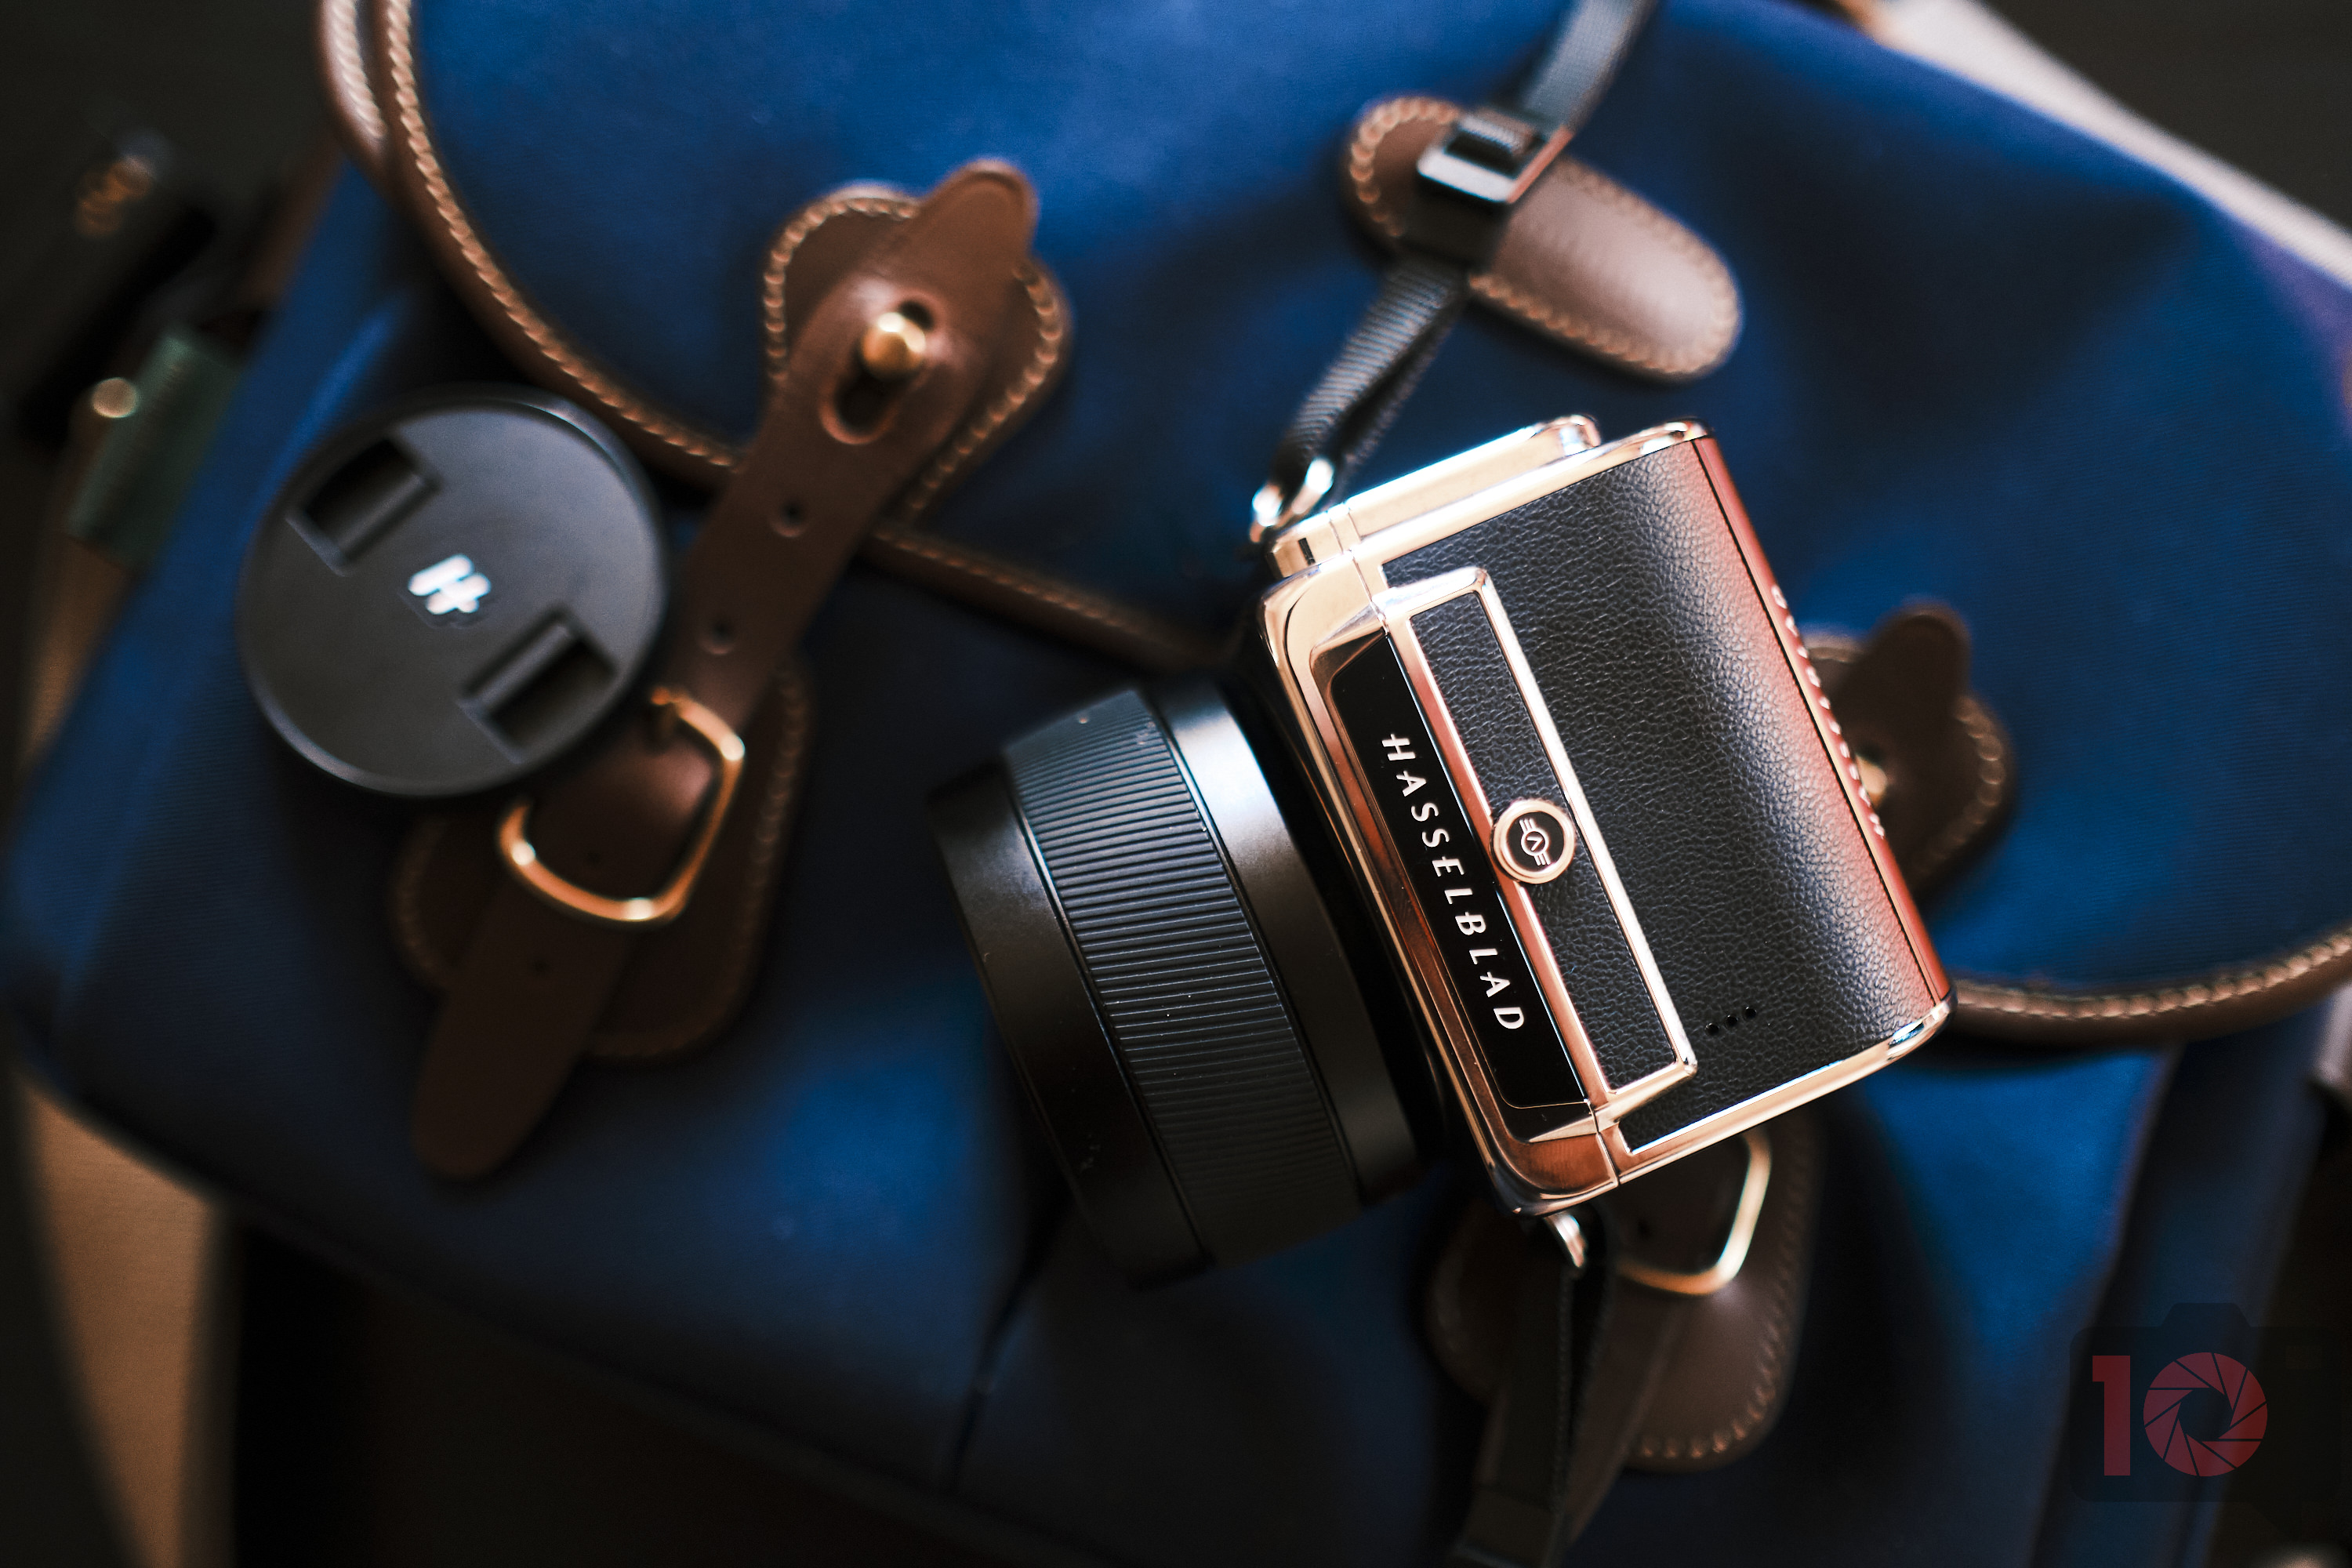 Can the Hasselblad 907x 100C Be the Innovative Camera We Need?